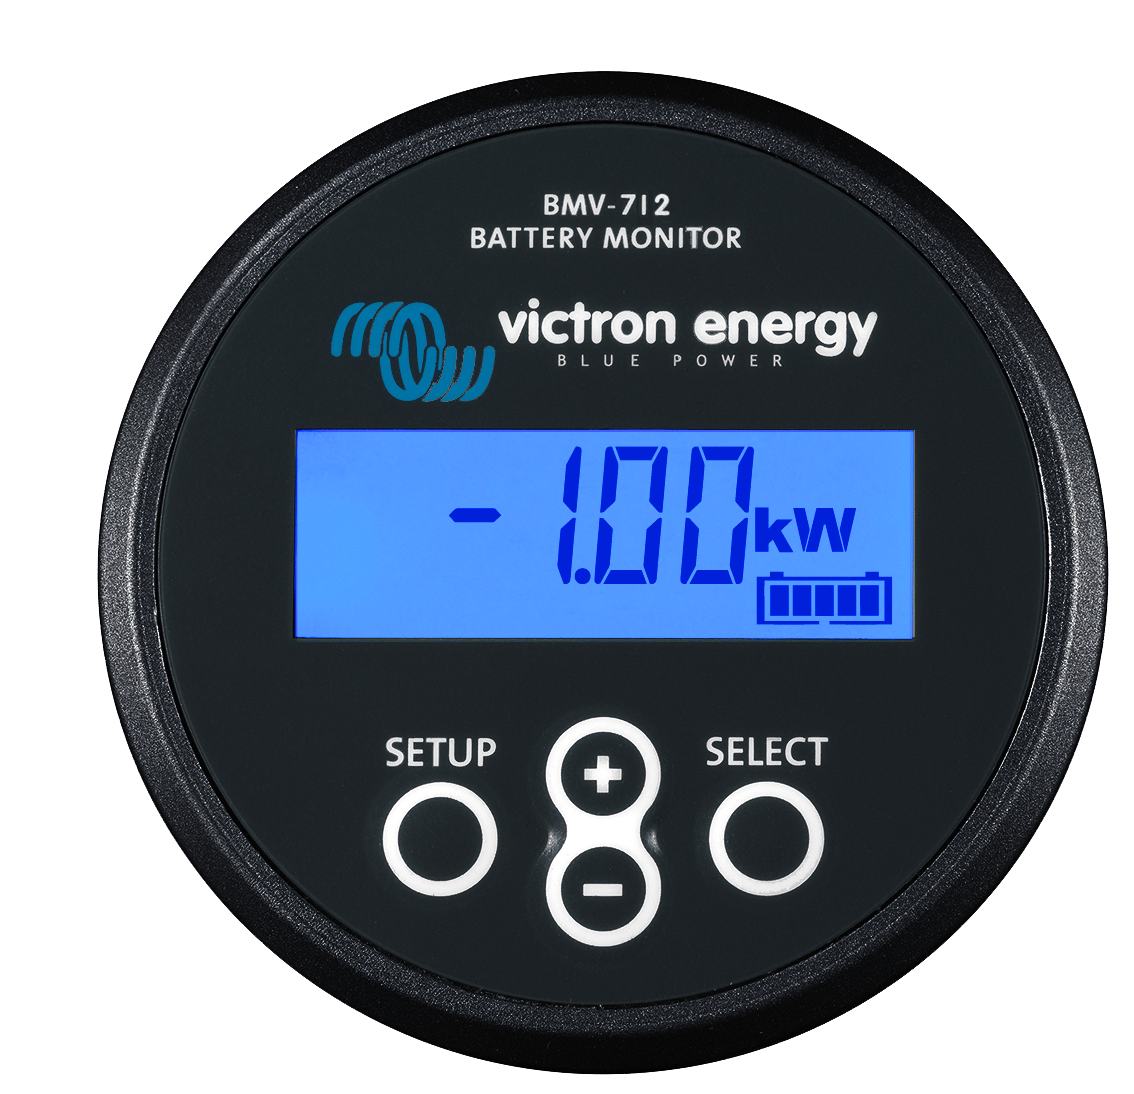 Does the Victron Energy BMV 712 come with shorter cables?